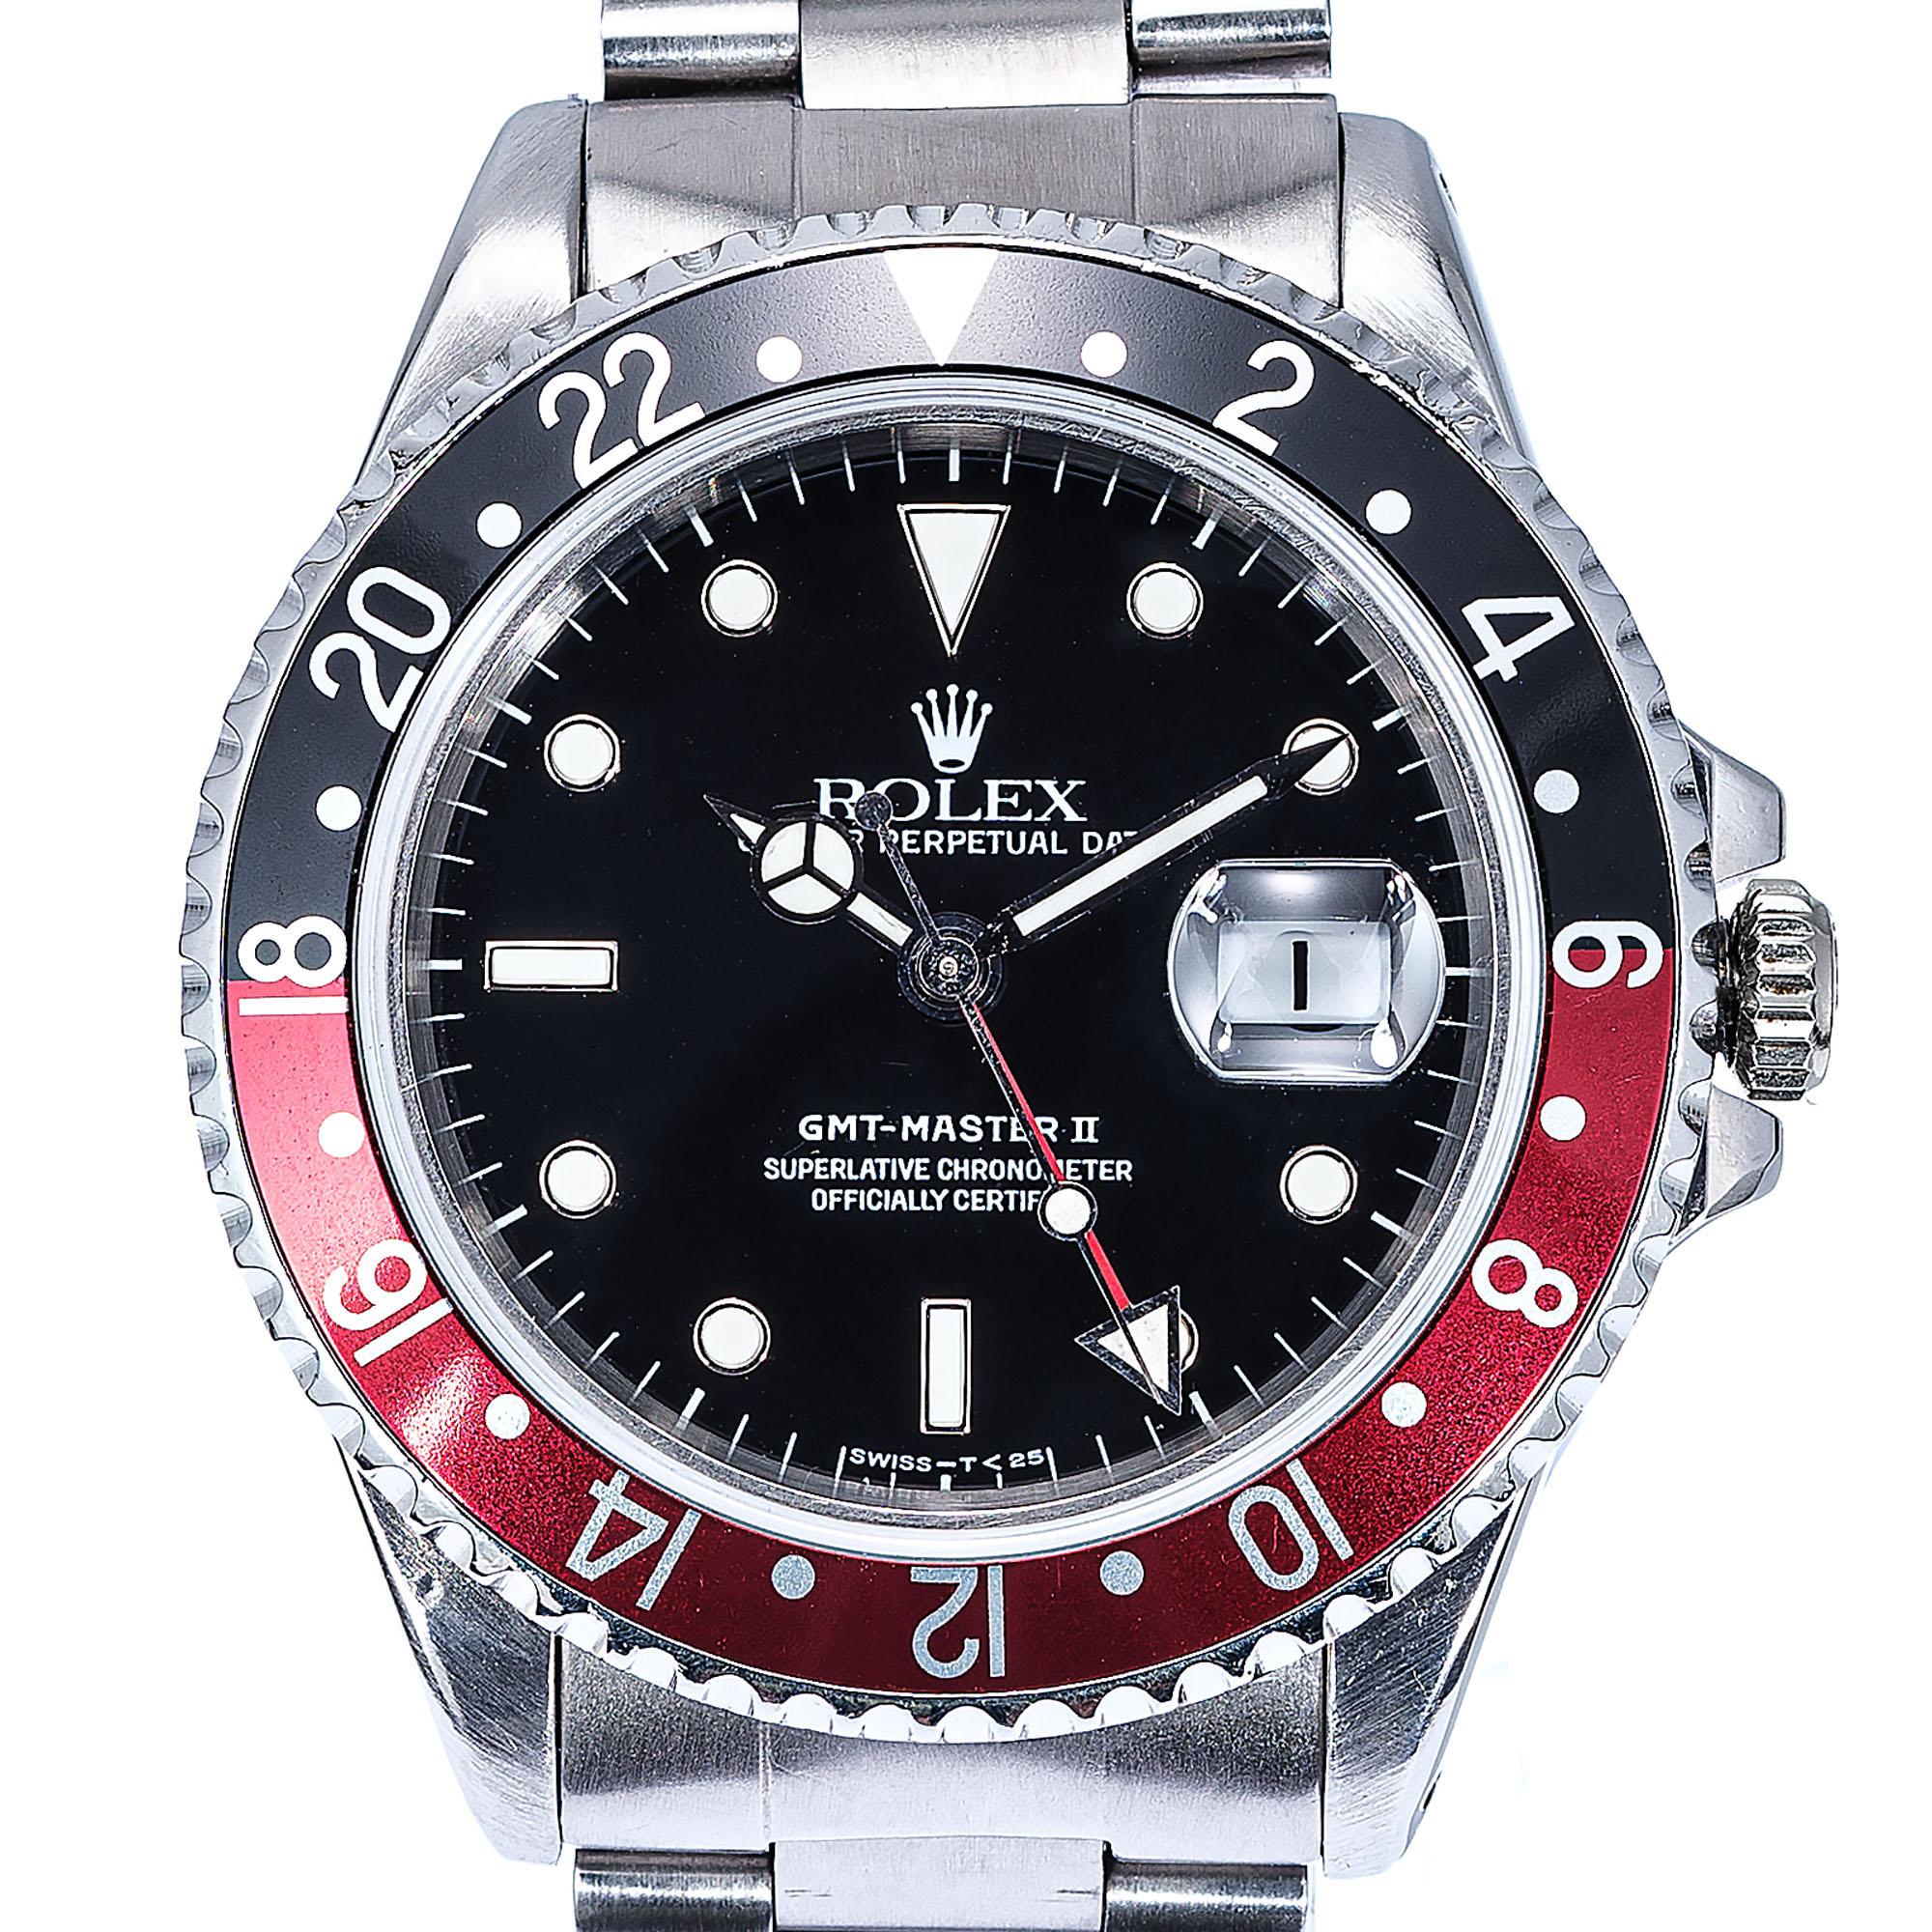 Vintage 1991 stainless steel original Rolex GMT. Not over polished. Original mark 3 bezel. Water sealed and pressure tested. 7.75 inches long.  

Length: 47.25mm
Width: 42mm
Band width at case: 20mm
Case thickness: 12mm
Band: stainless steel oyster